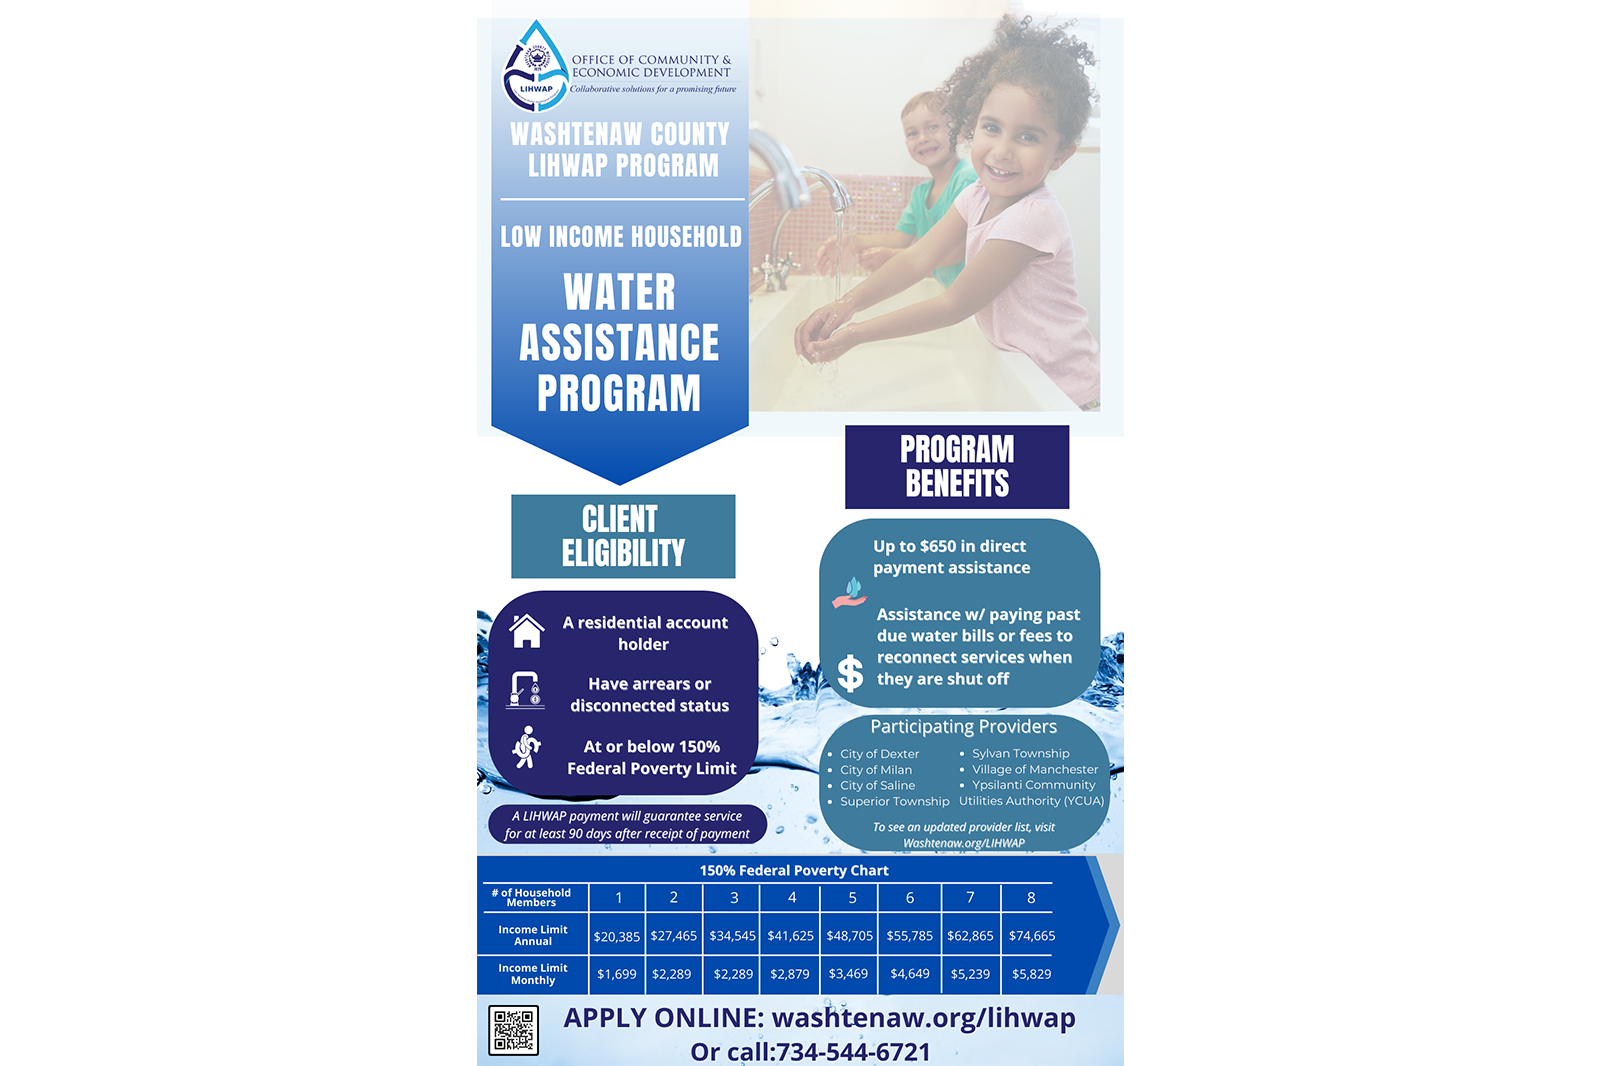 A flyer for Washtenaw County's new Low Income Household Water Assistance Program.